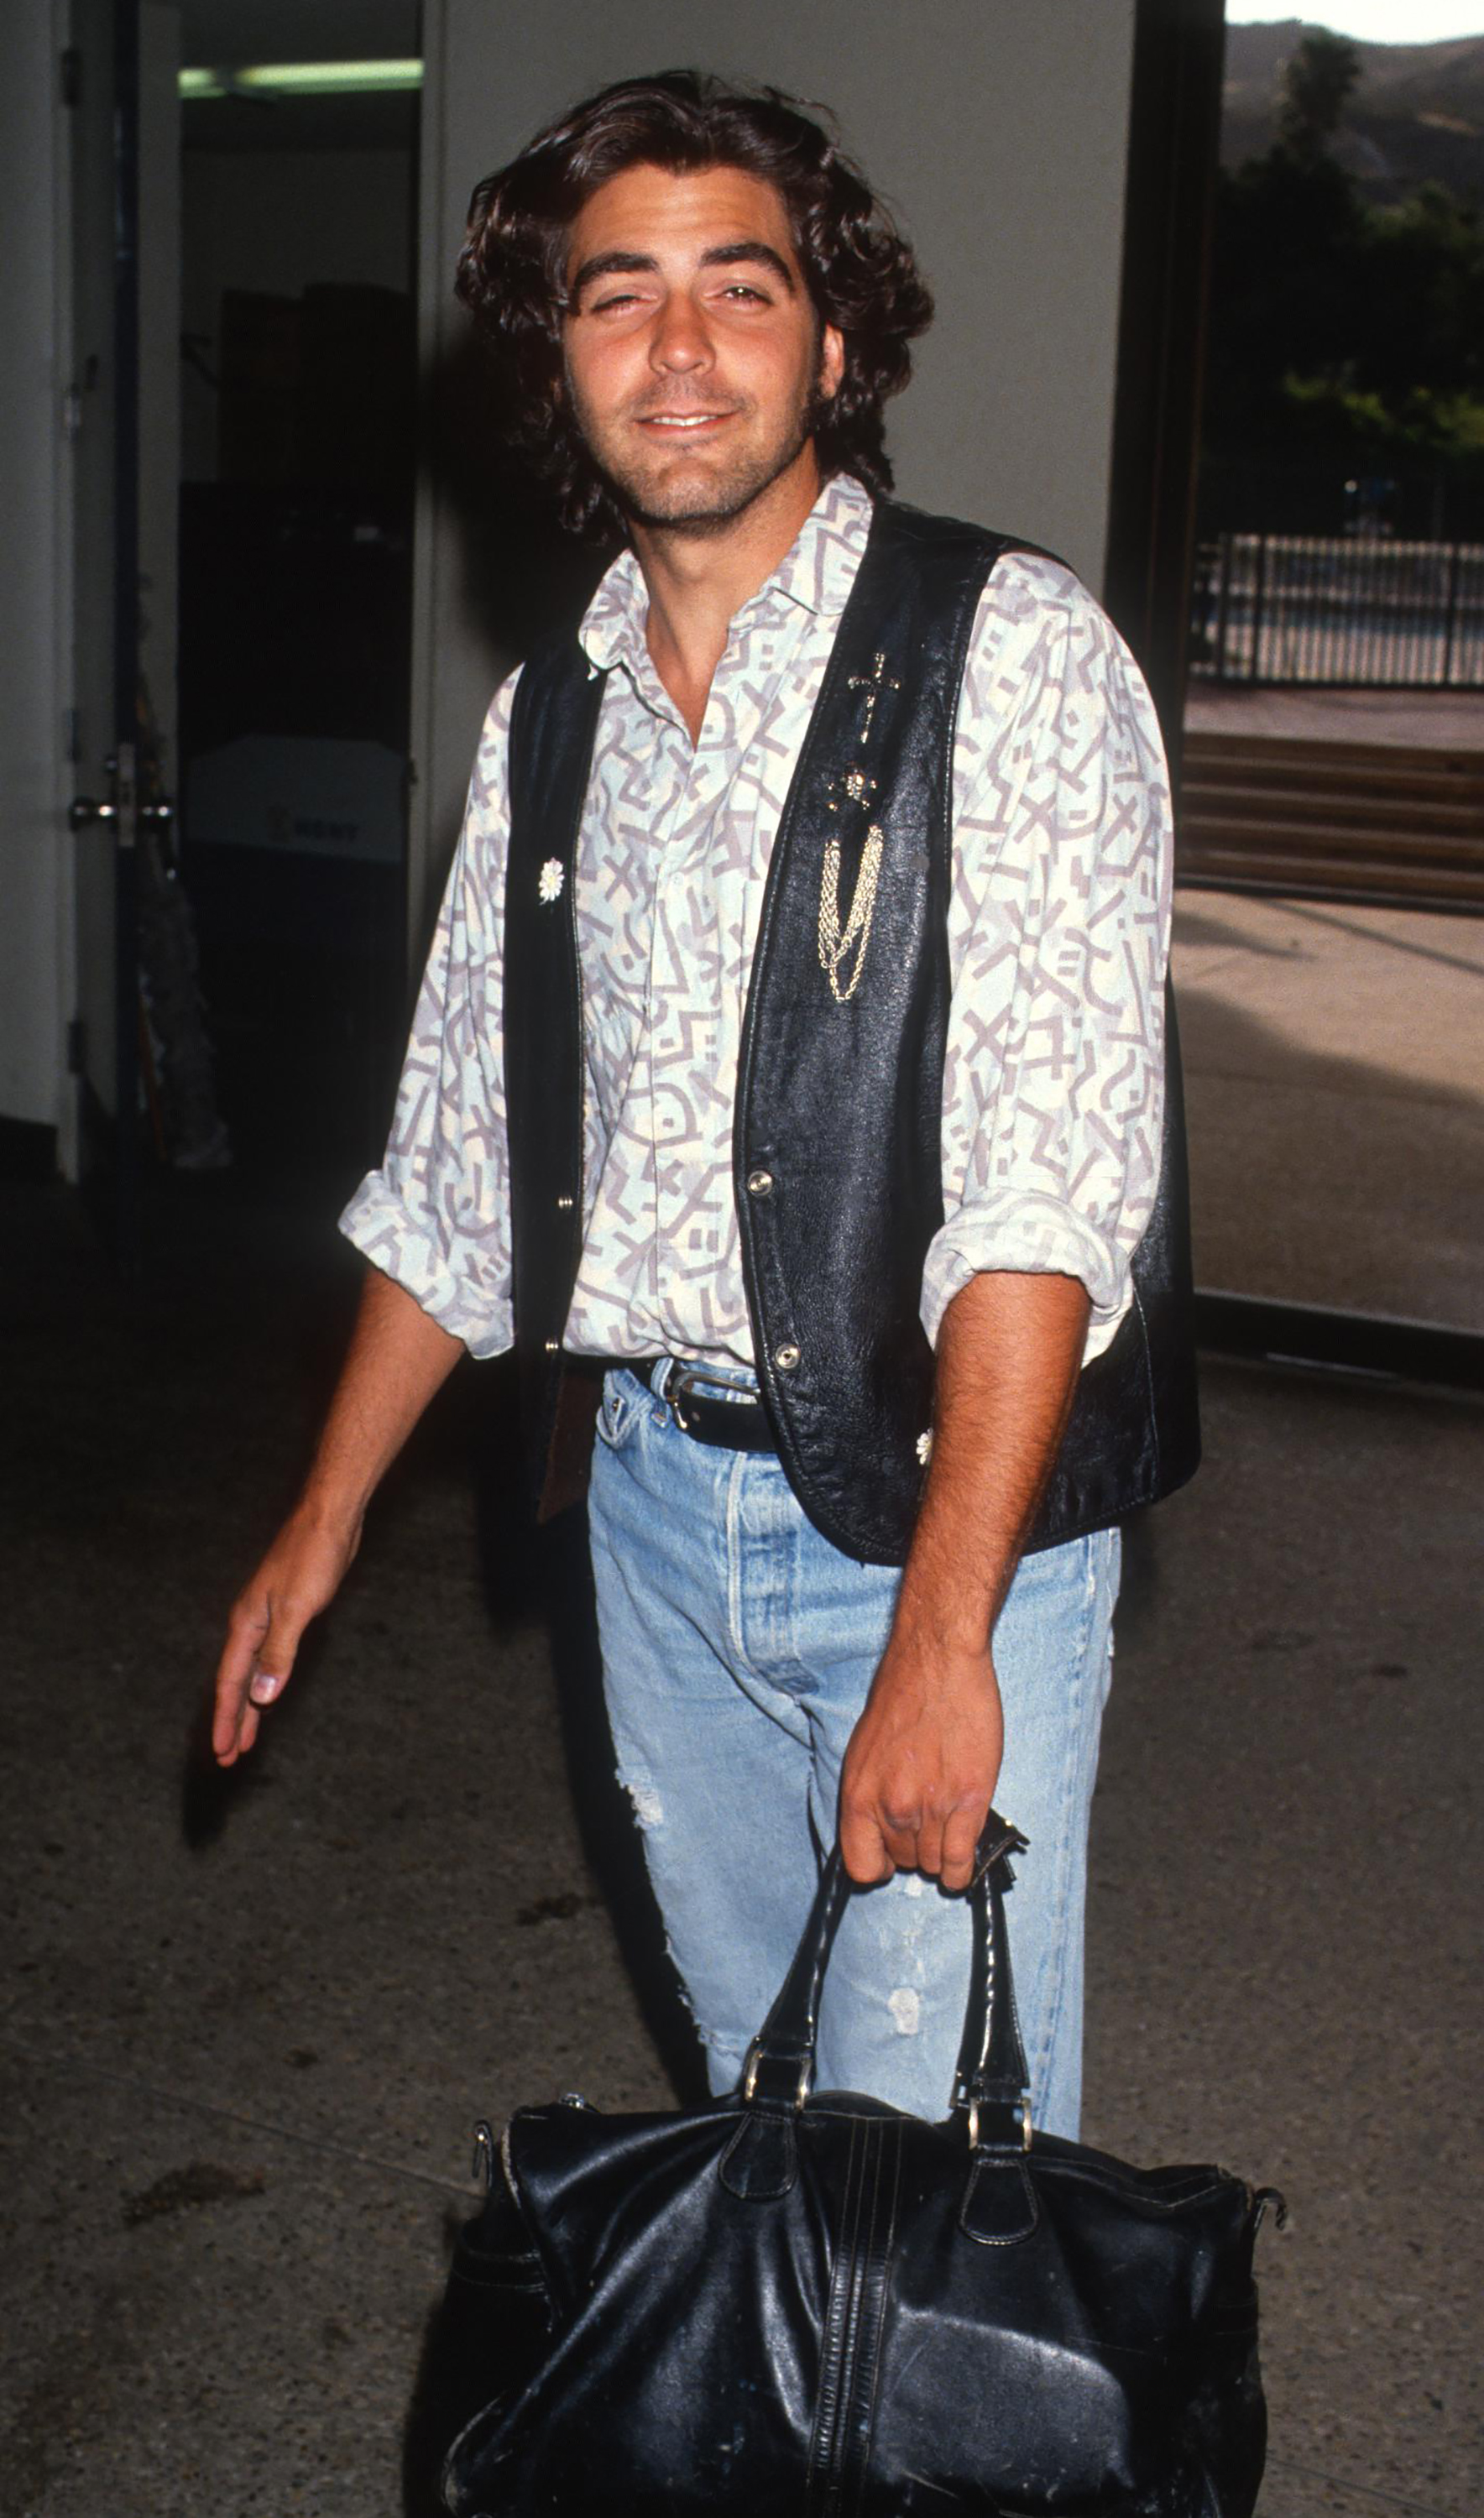 George Clooney spotted at a celebrity basketball game in Malibu, California on June 24, 1989 | Source: Getty Images